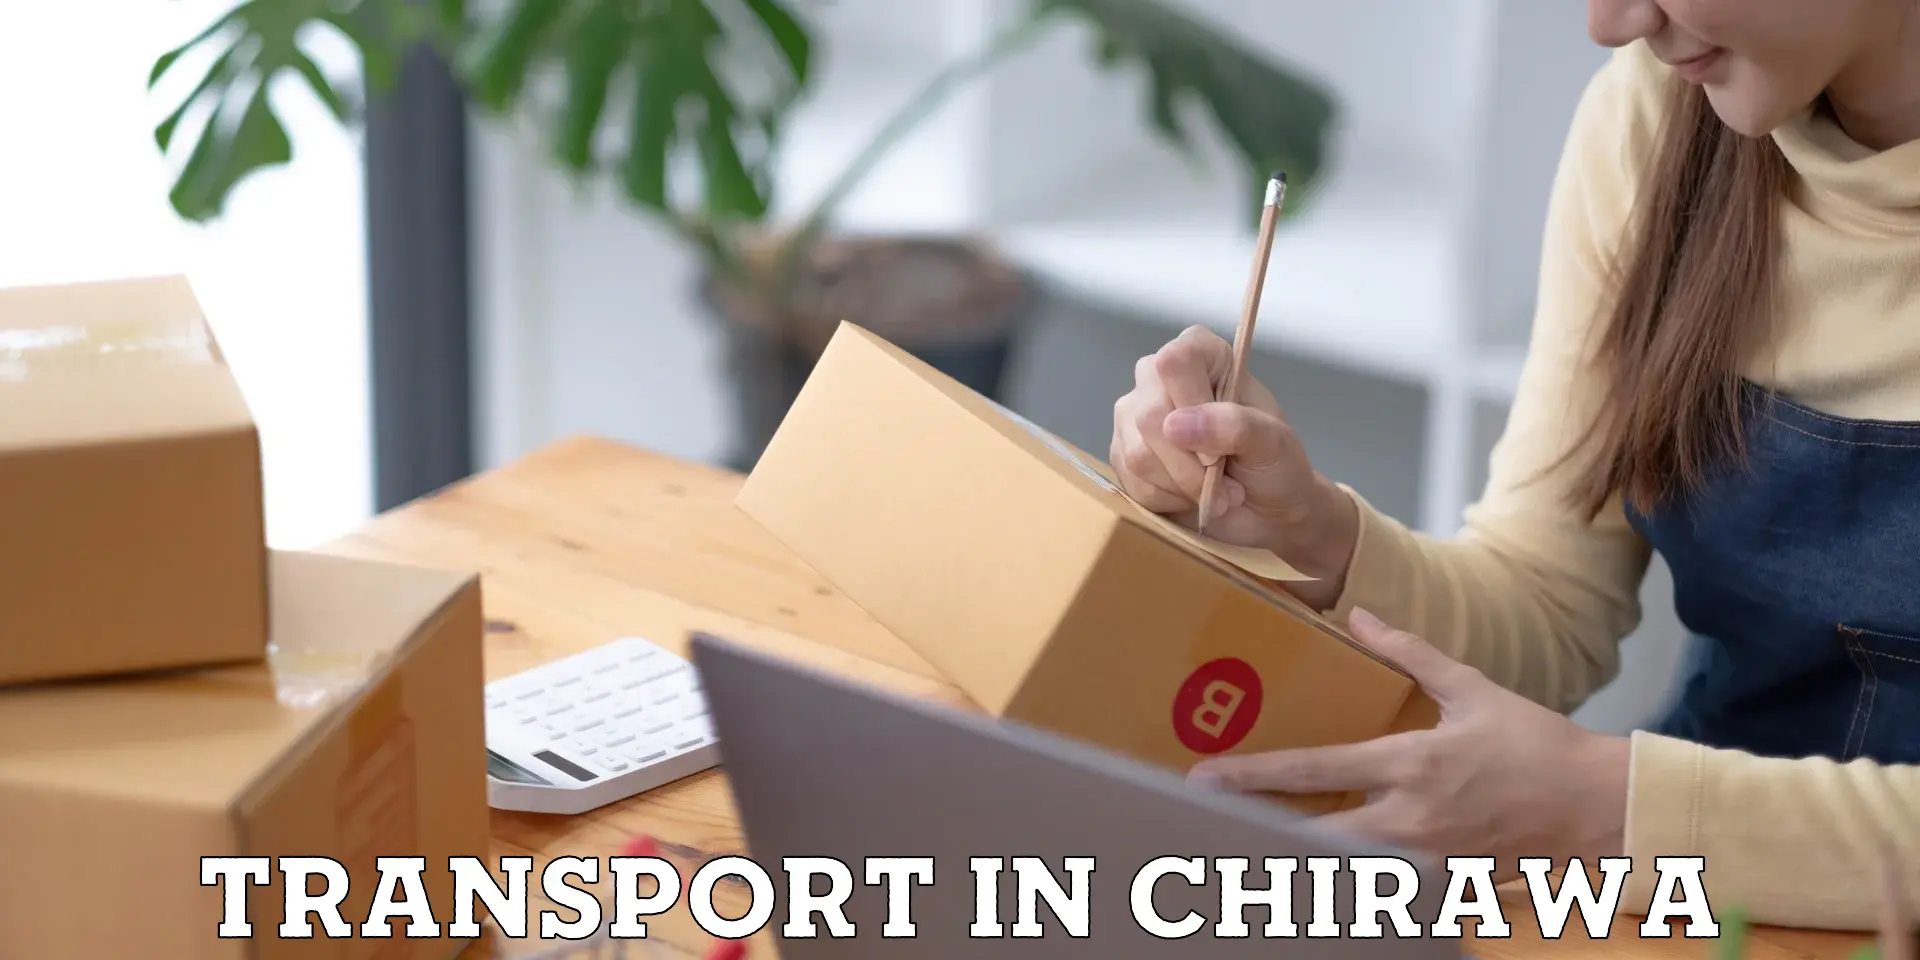 Cargo transport services in Chirawa